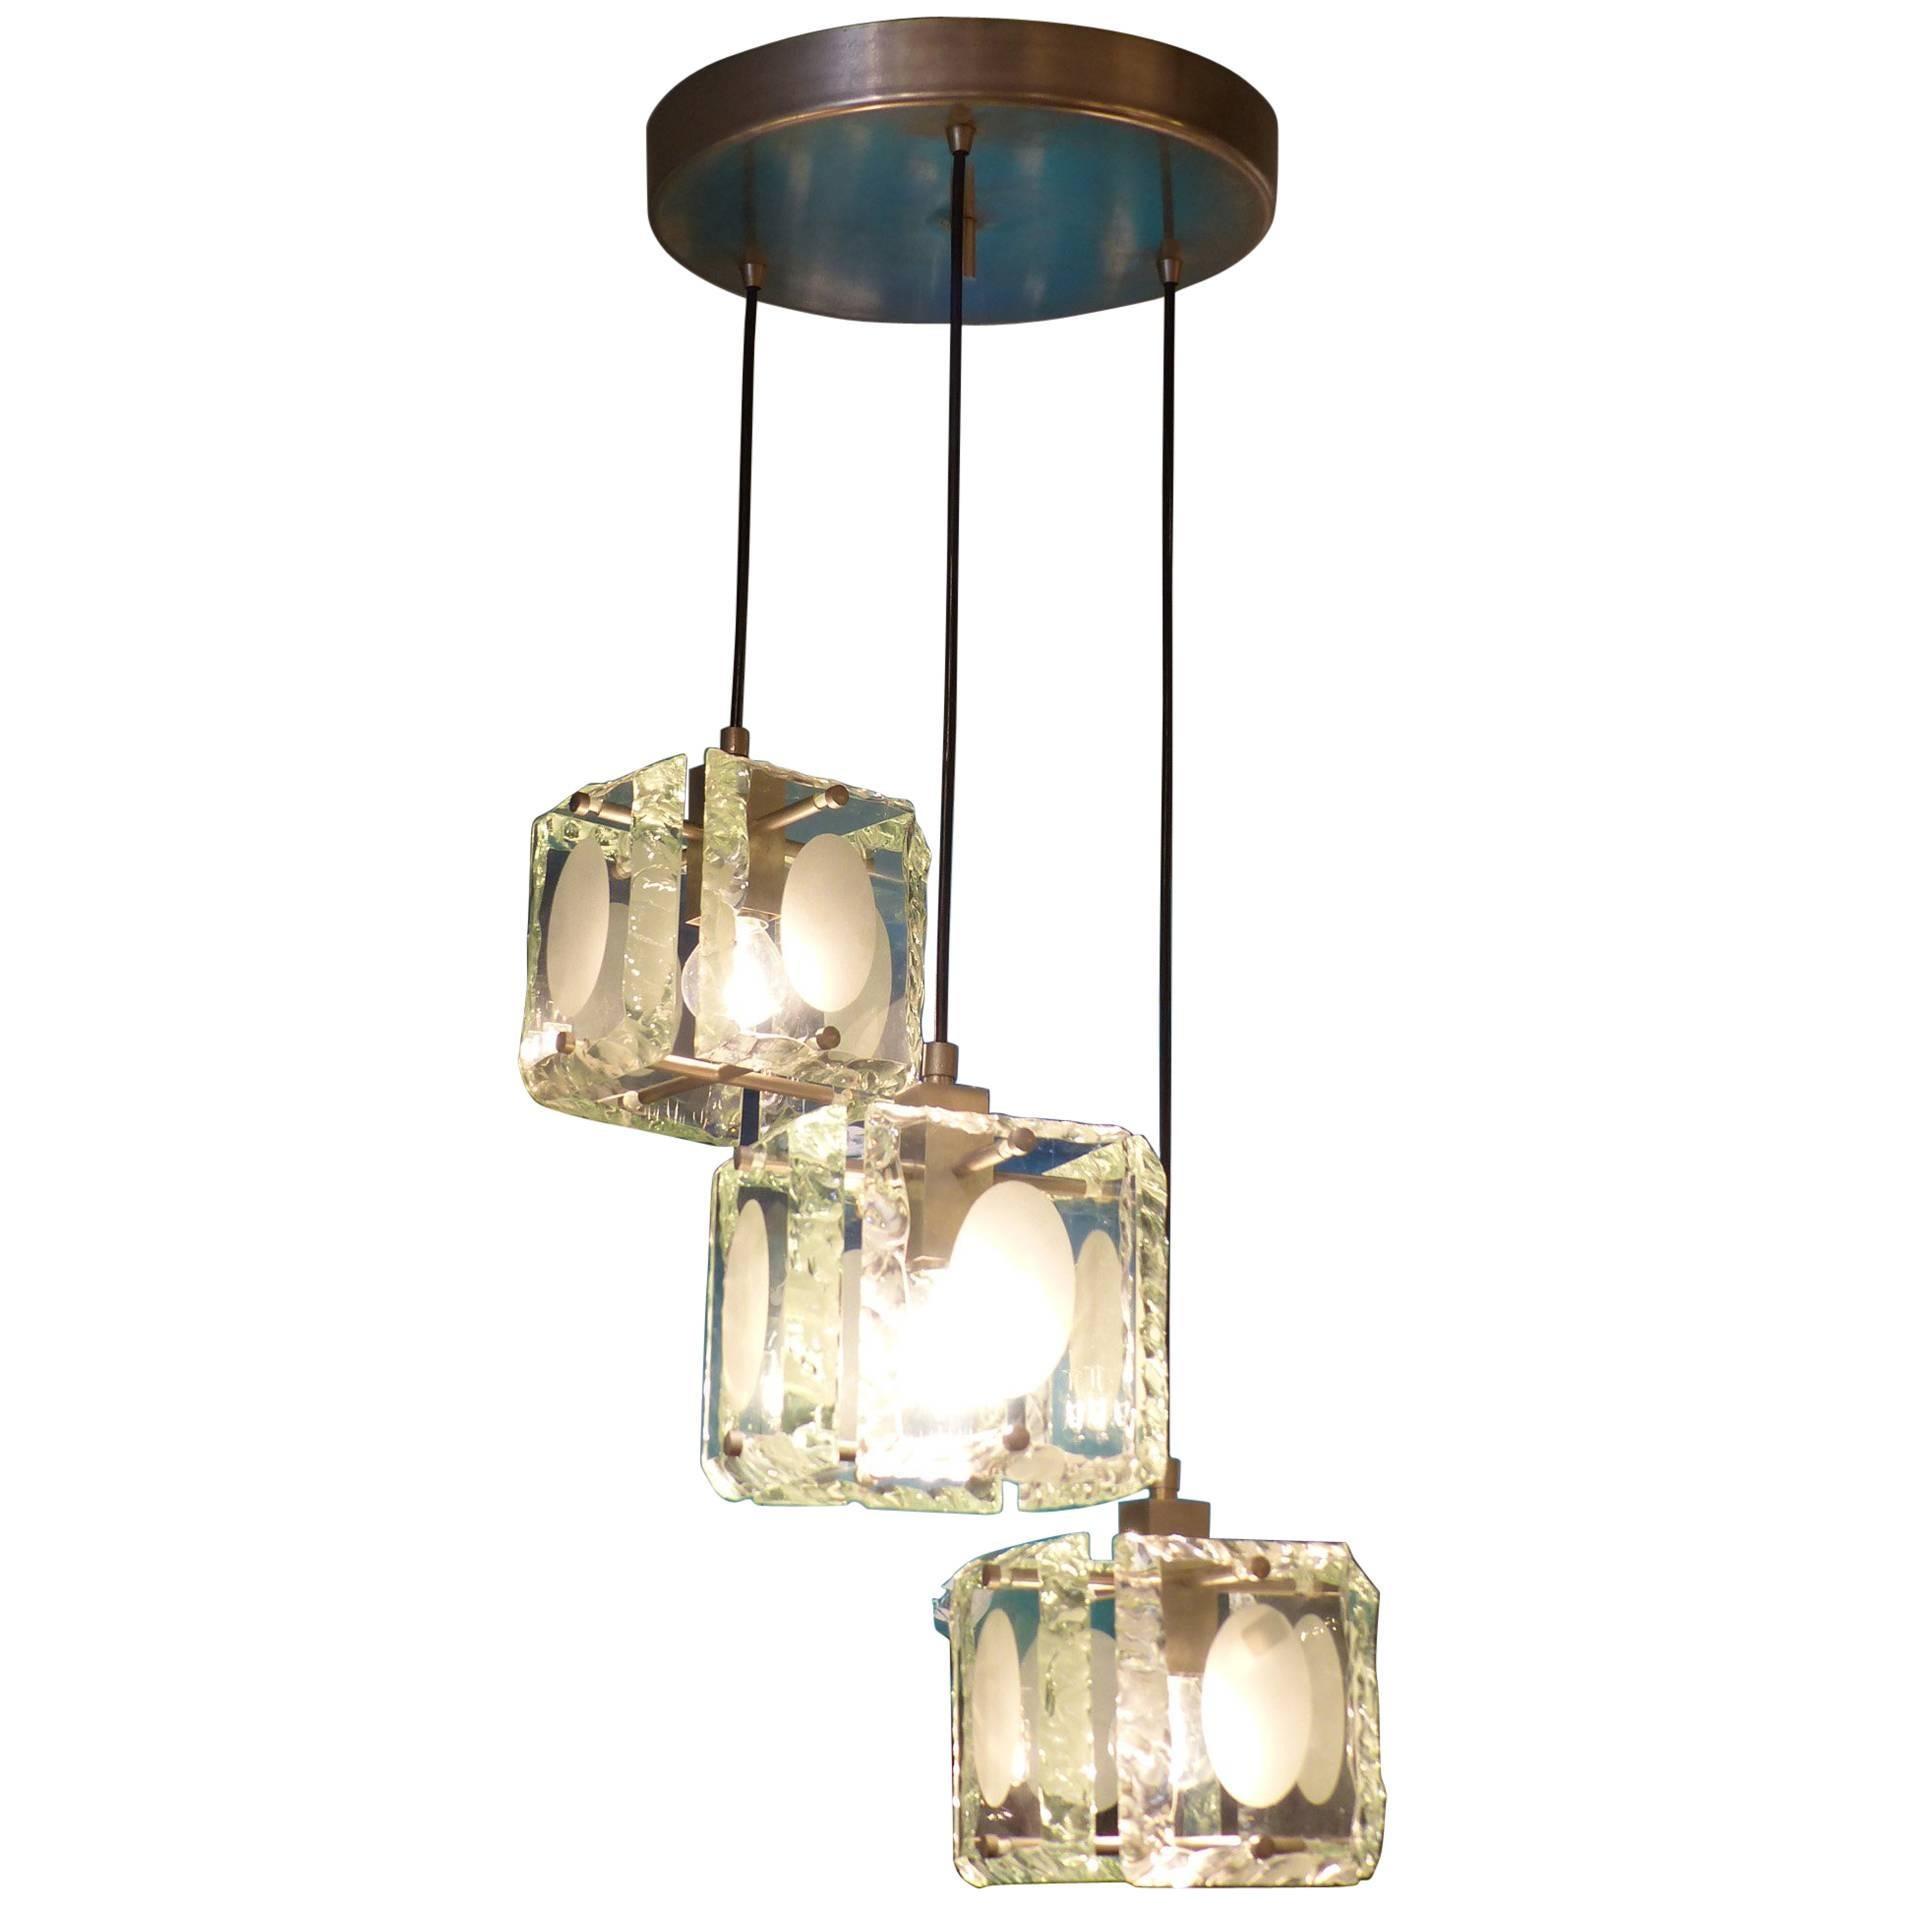 Fantastic Max Ingrand Glass Chandelier, circa 1970 For Sale